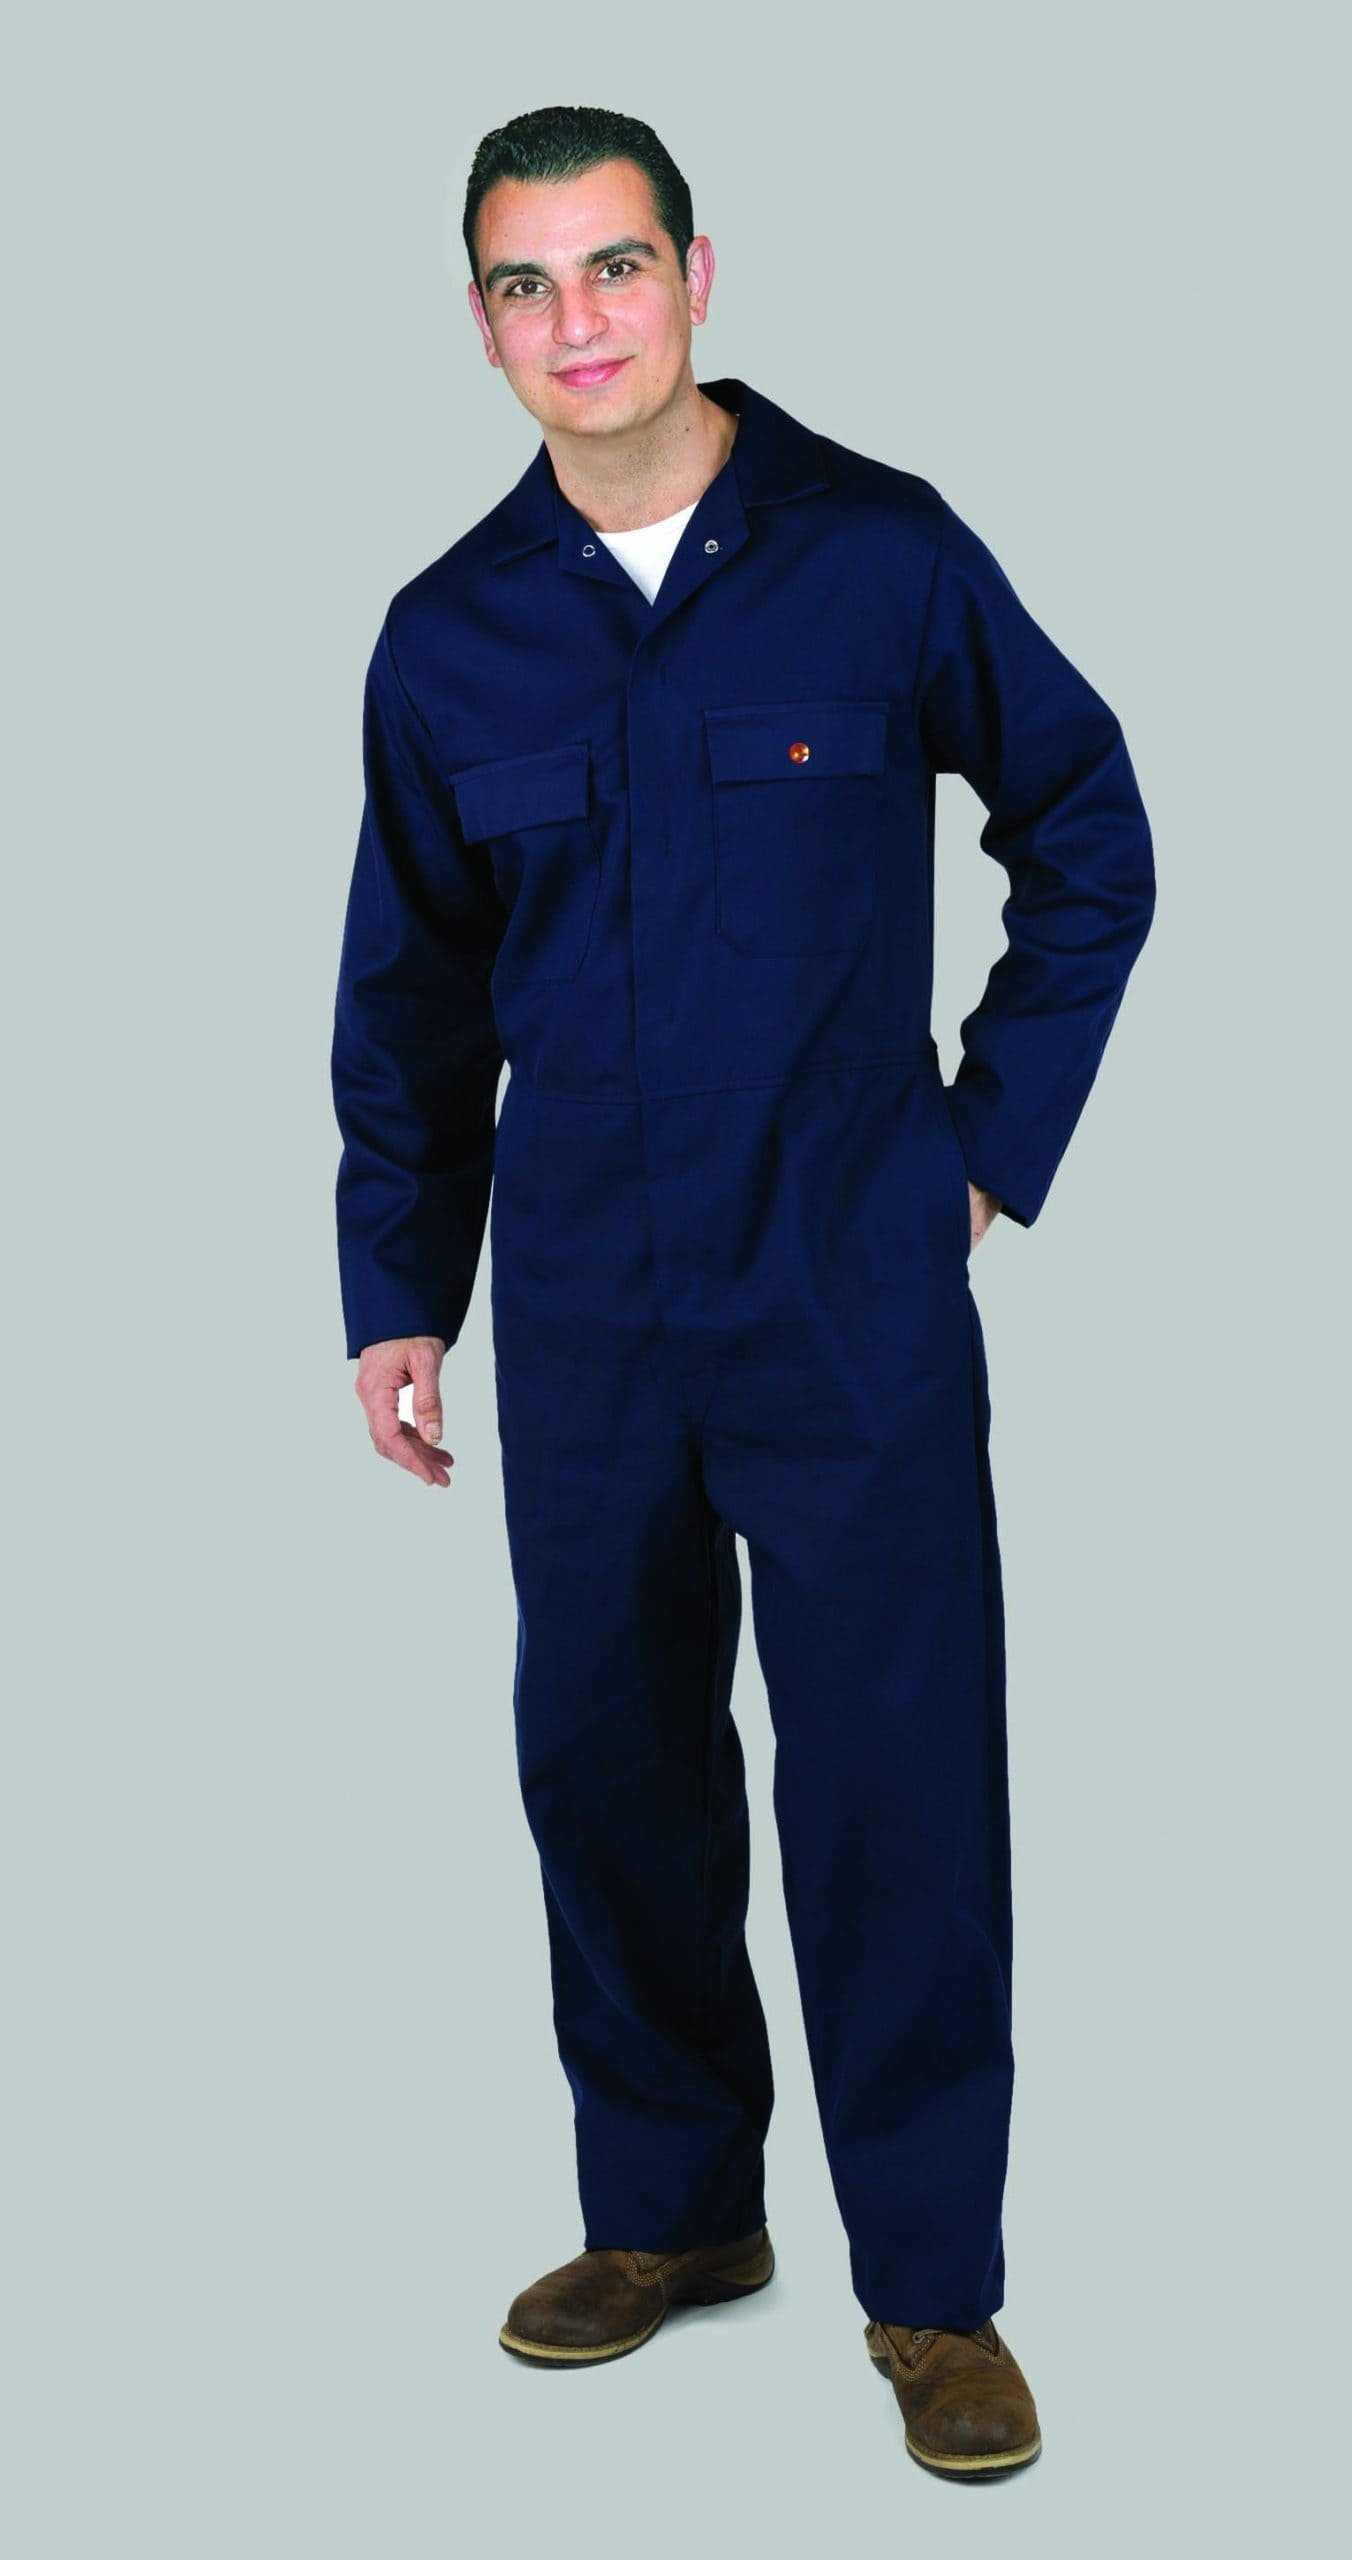 Men's Protective Suit with Multi pocket